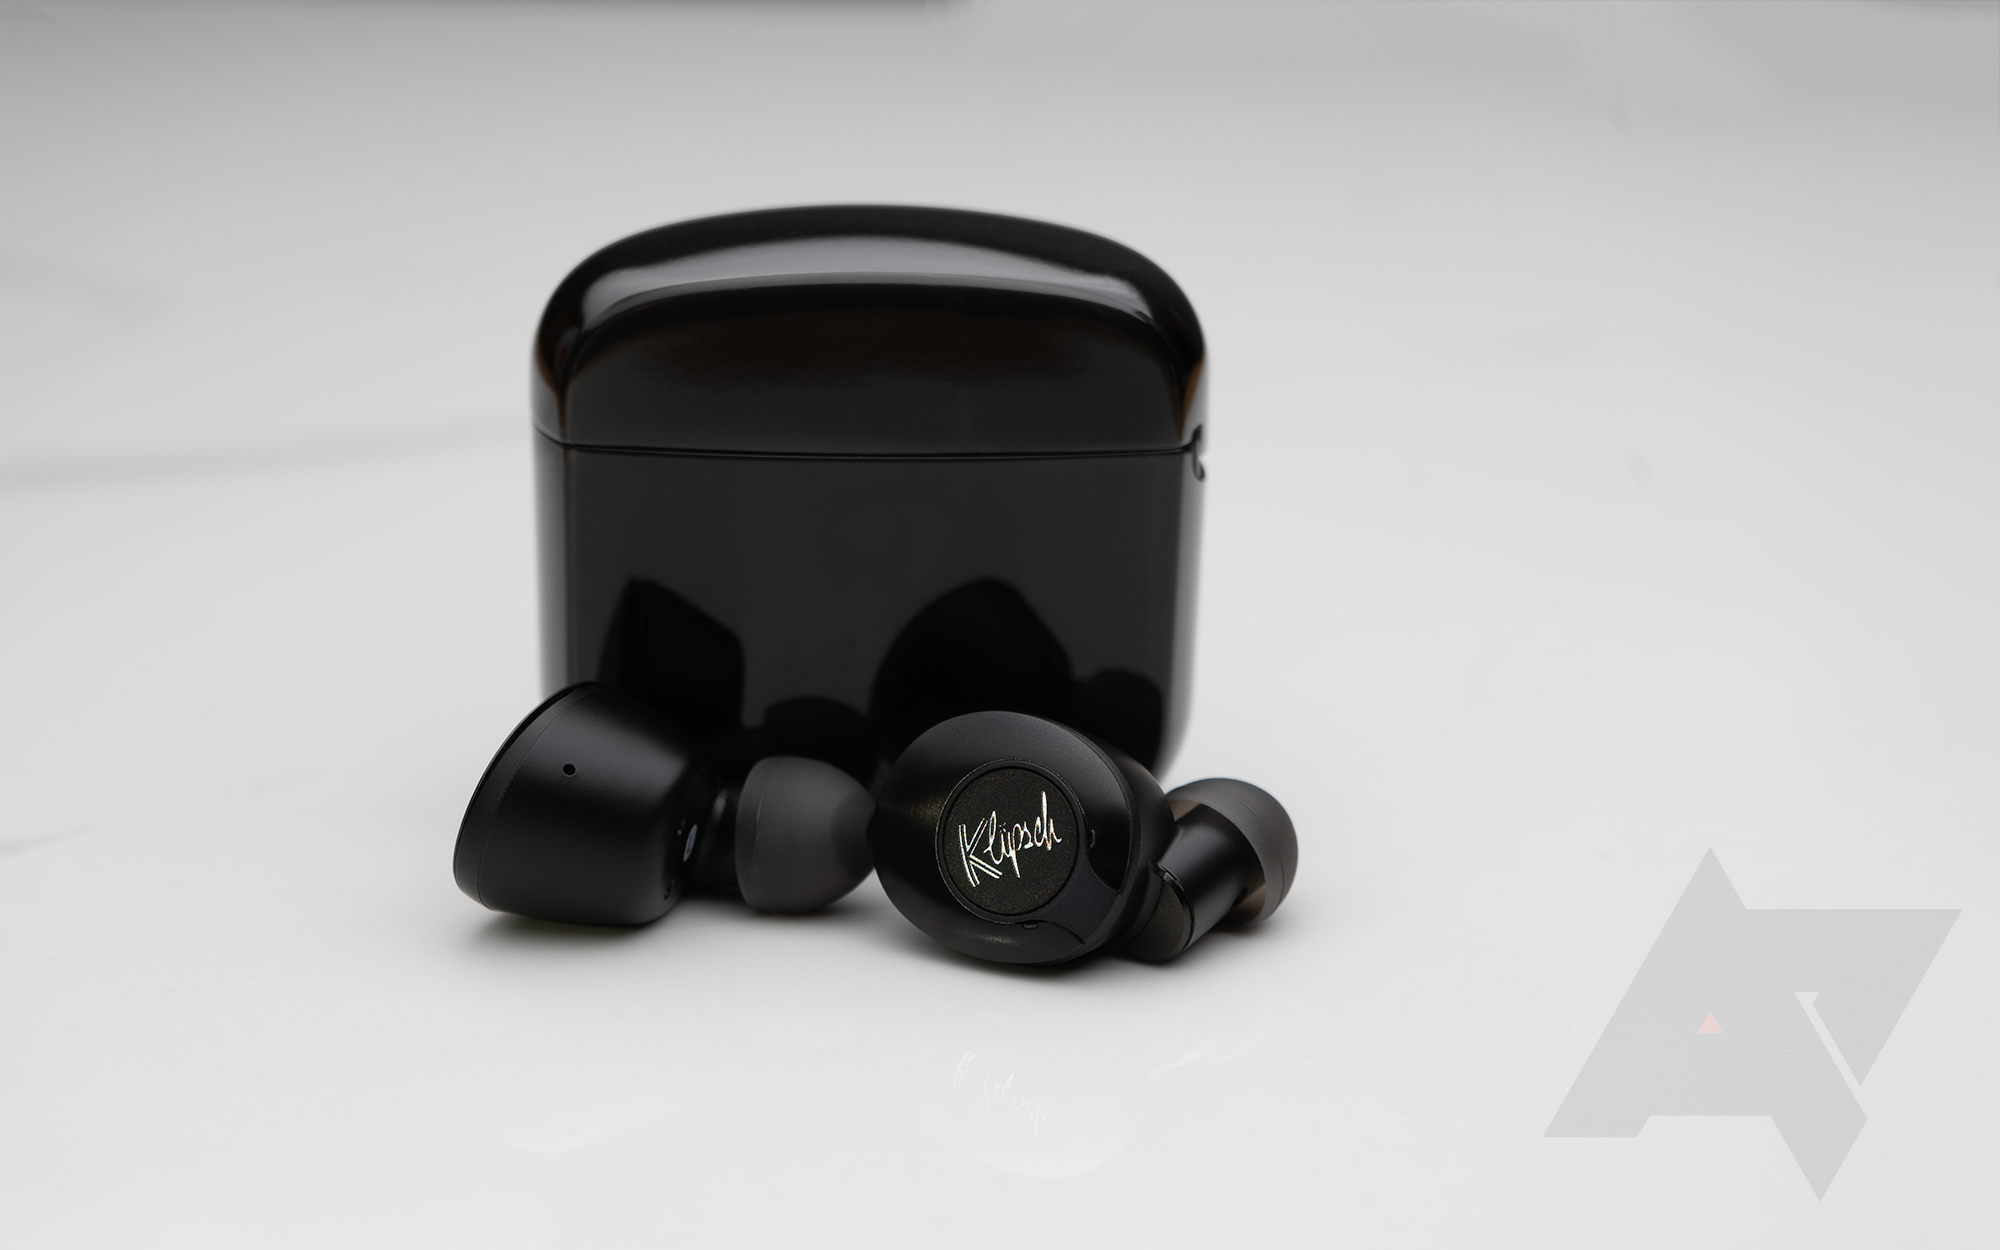 Klipsch T5 II ANC review: Form over function